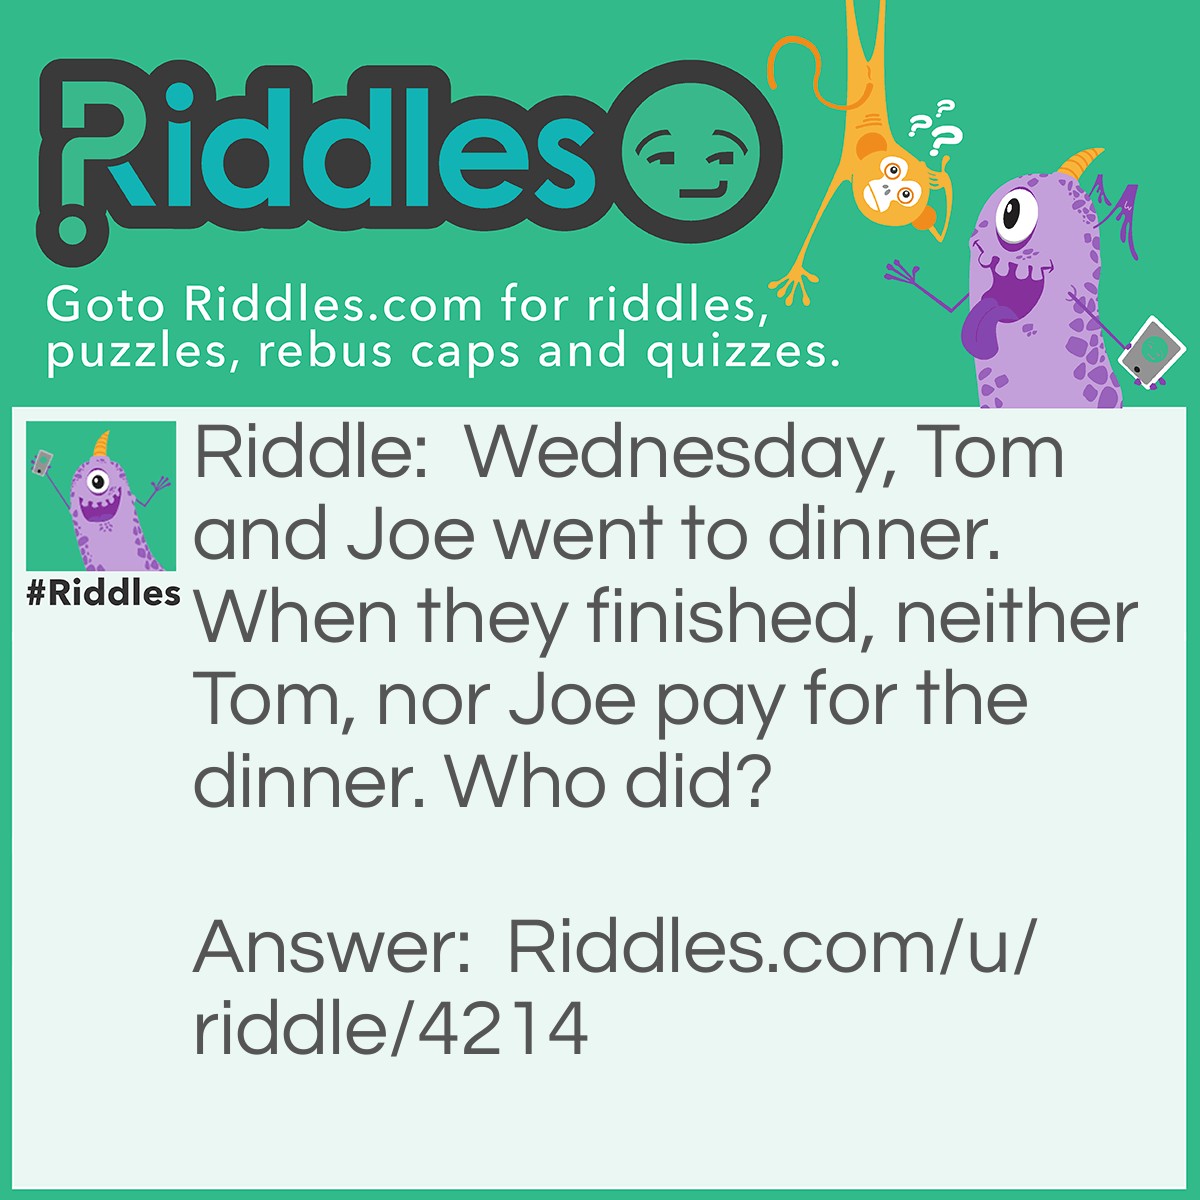 Riddle: Wednesday, Tom and Joe went to dinner. When they finished, neither Tom, nor Joe pay for the dinner. Who did? Answer: Wednesday (it's a name).